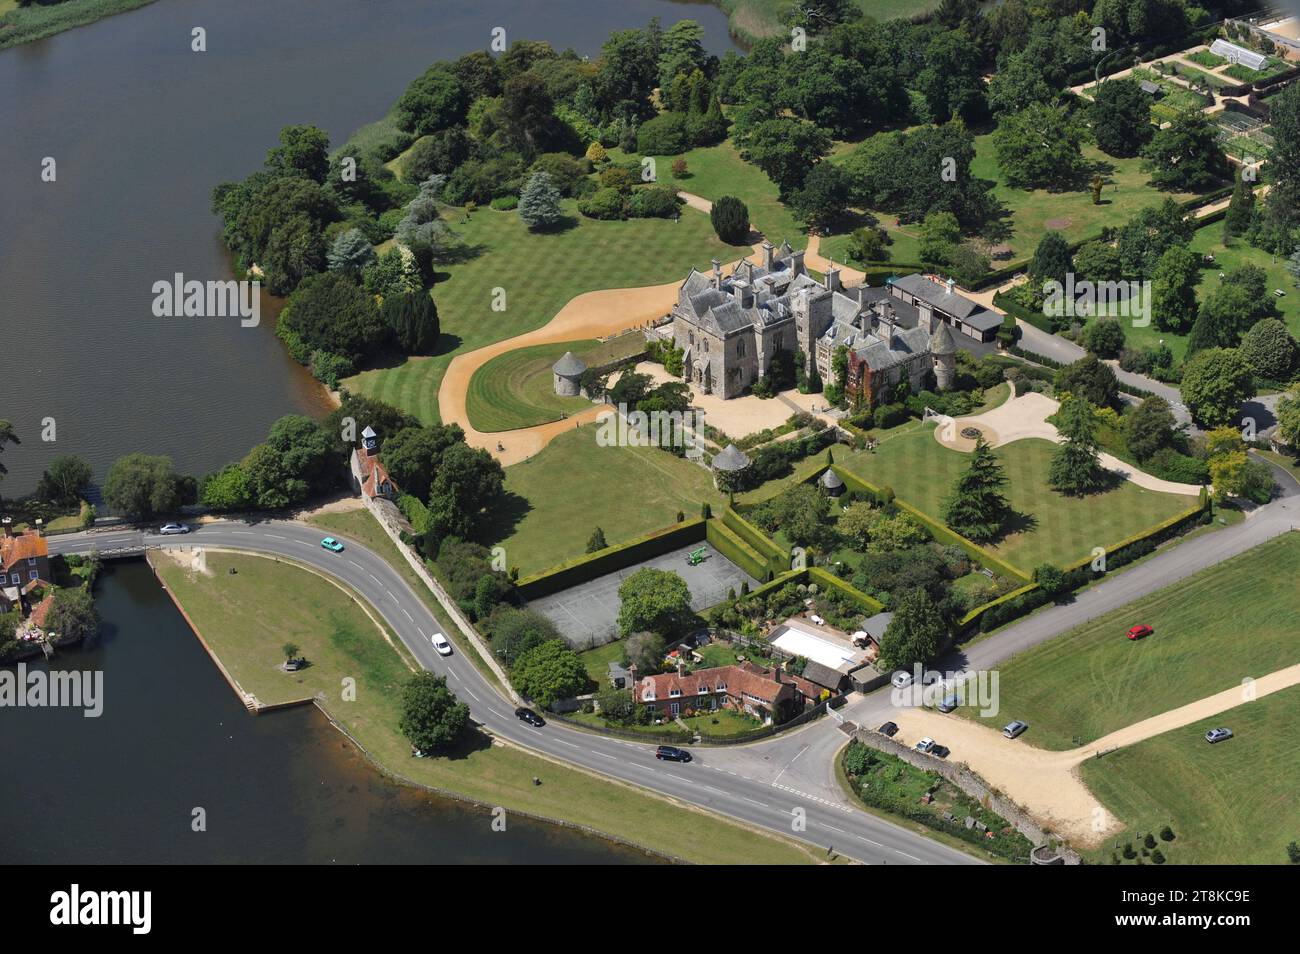 An Aerial Photograph of Beaulieu House Home of lord Montague, in the New Forest, Hampshire, UK Stock Photo